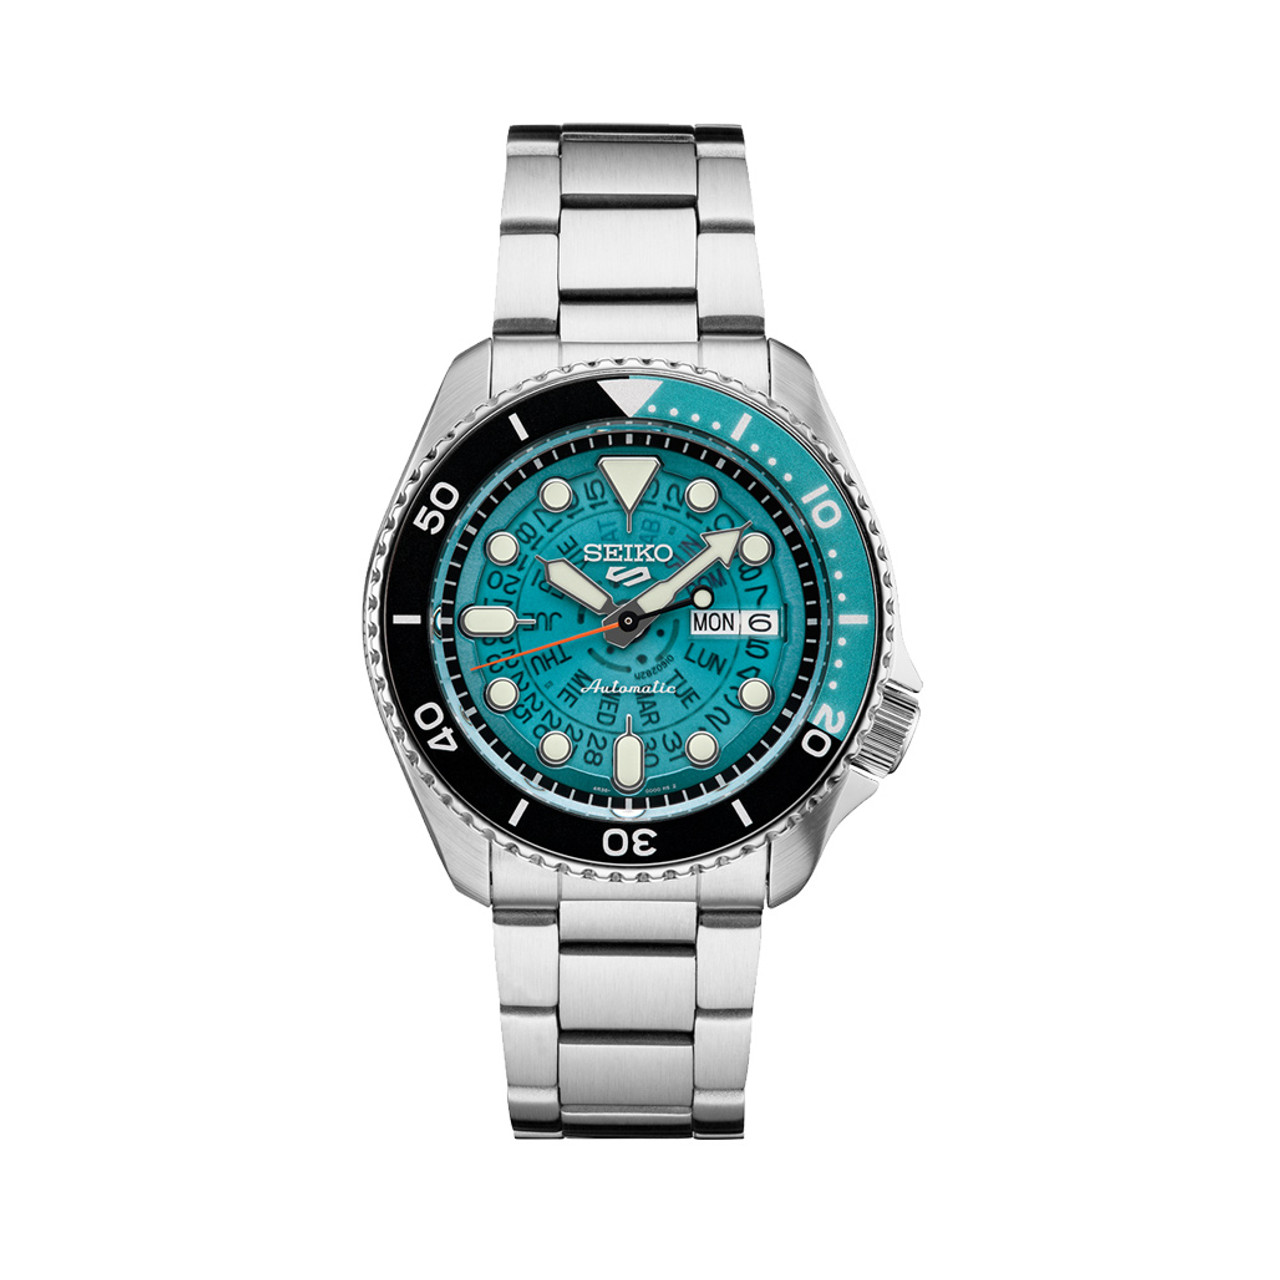 Seiko 5 Sports "Time-Sonar" Watch with See-Thru Dial #SRPJ45